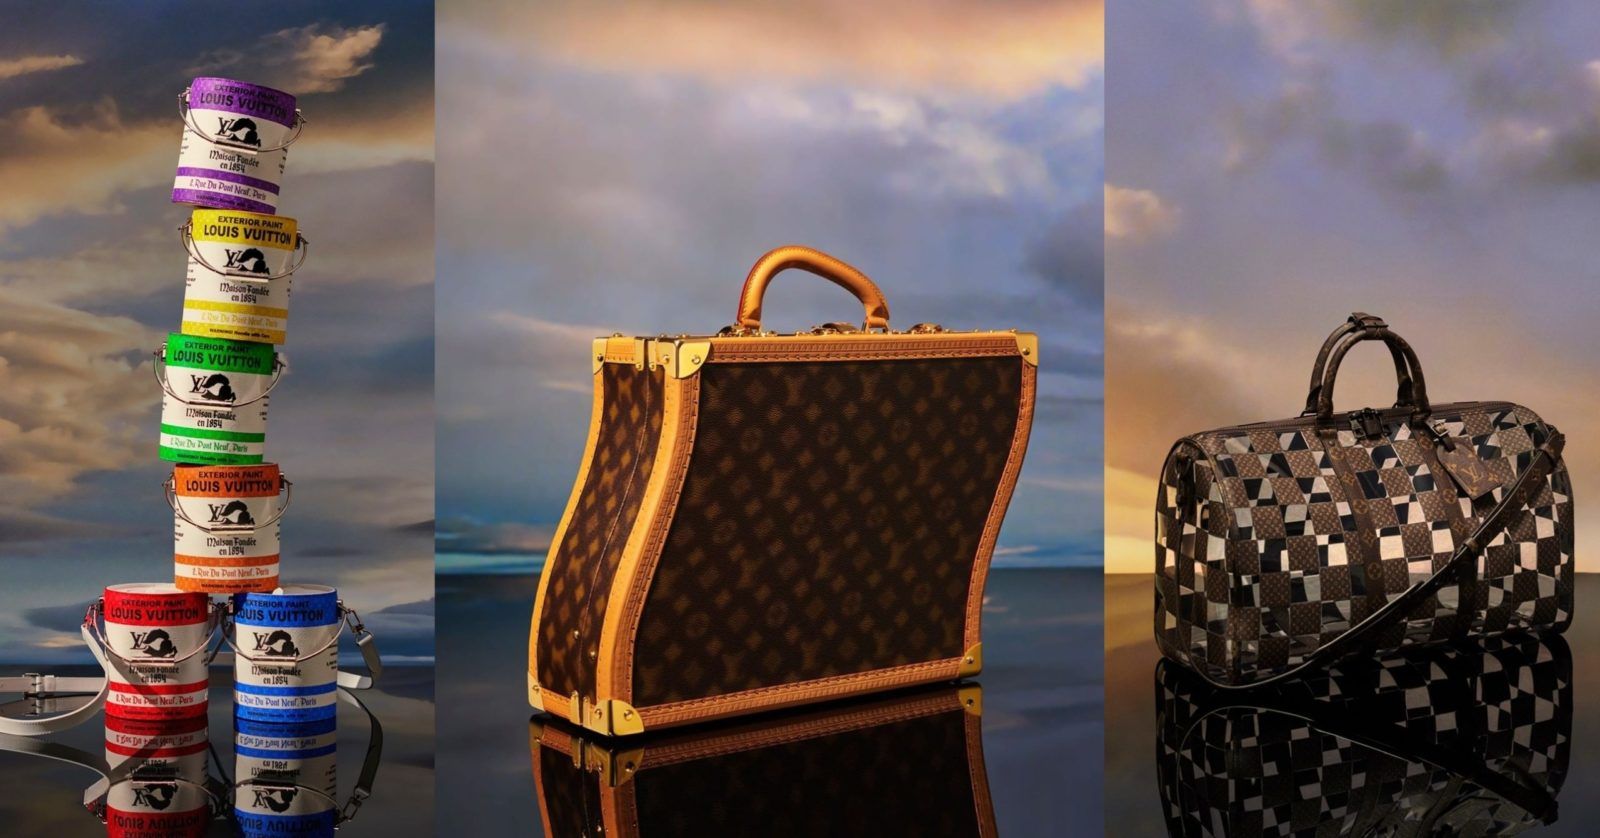 Is Virgil Abloh’s last Louis Vuitton collection inspired by Salvador Dali?